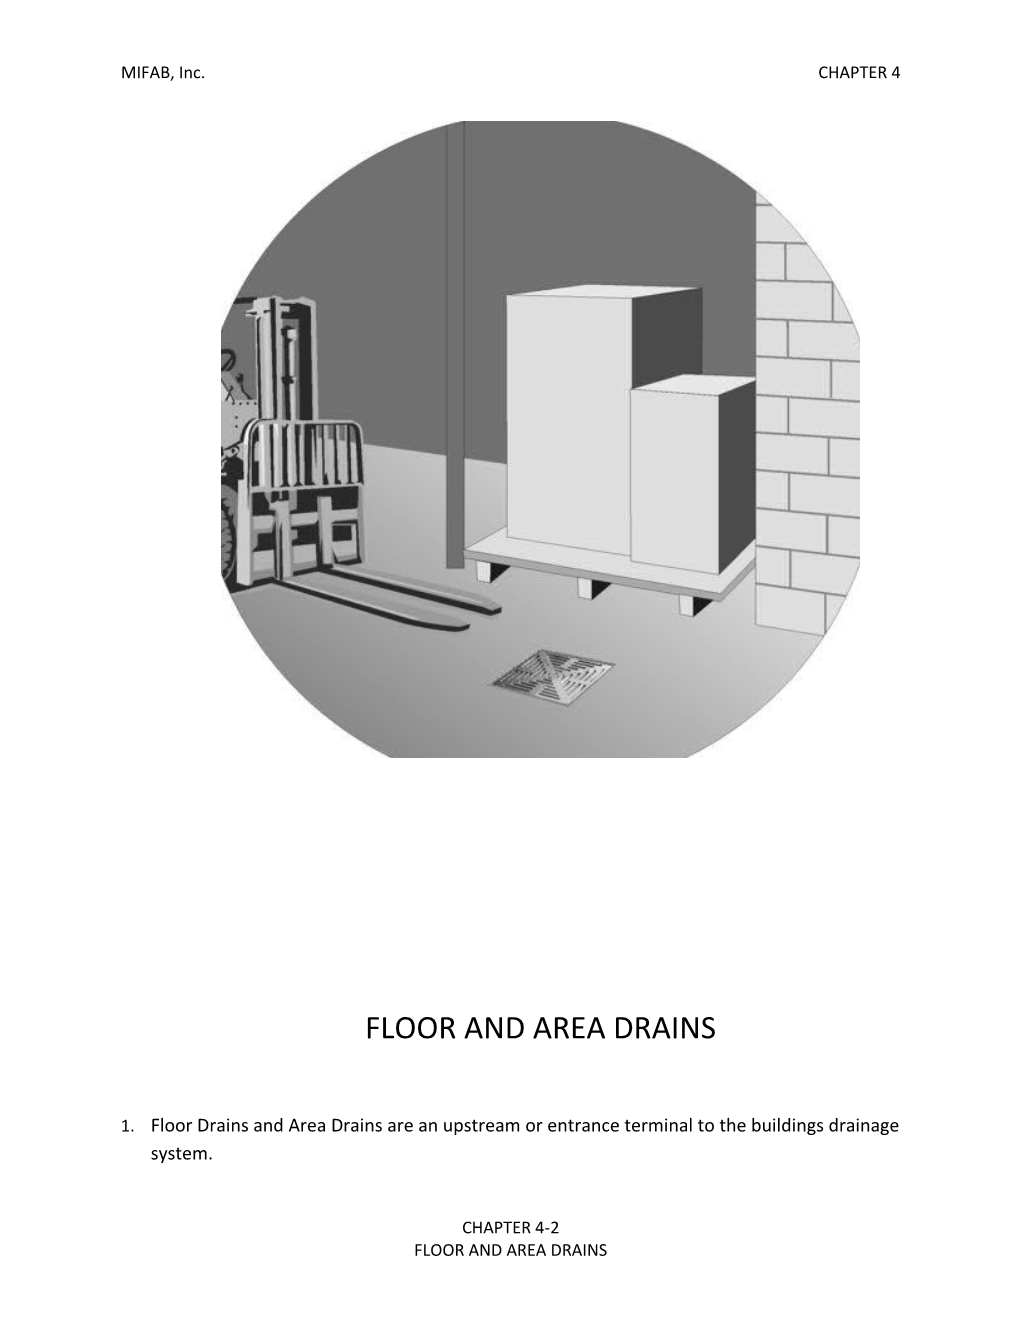 Floor and Area Drains